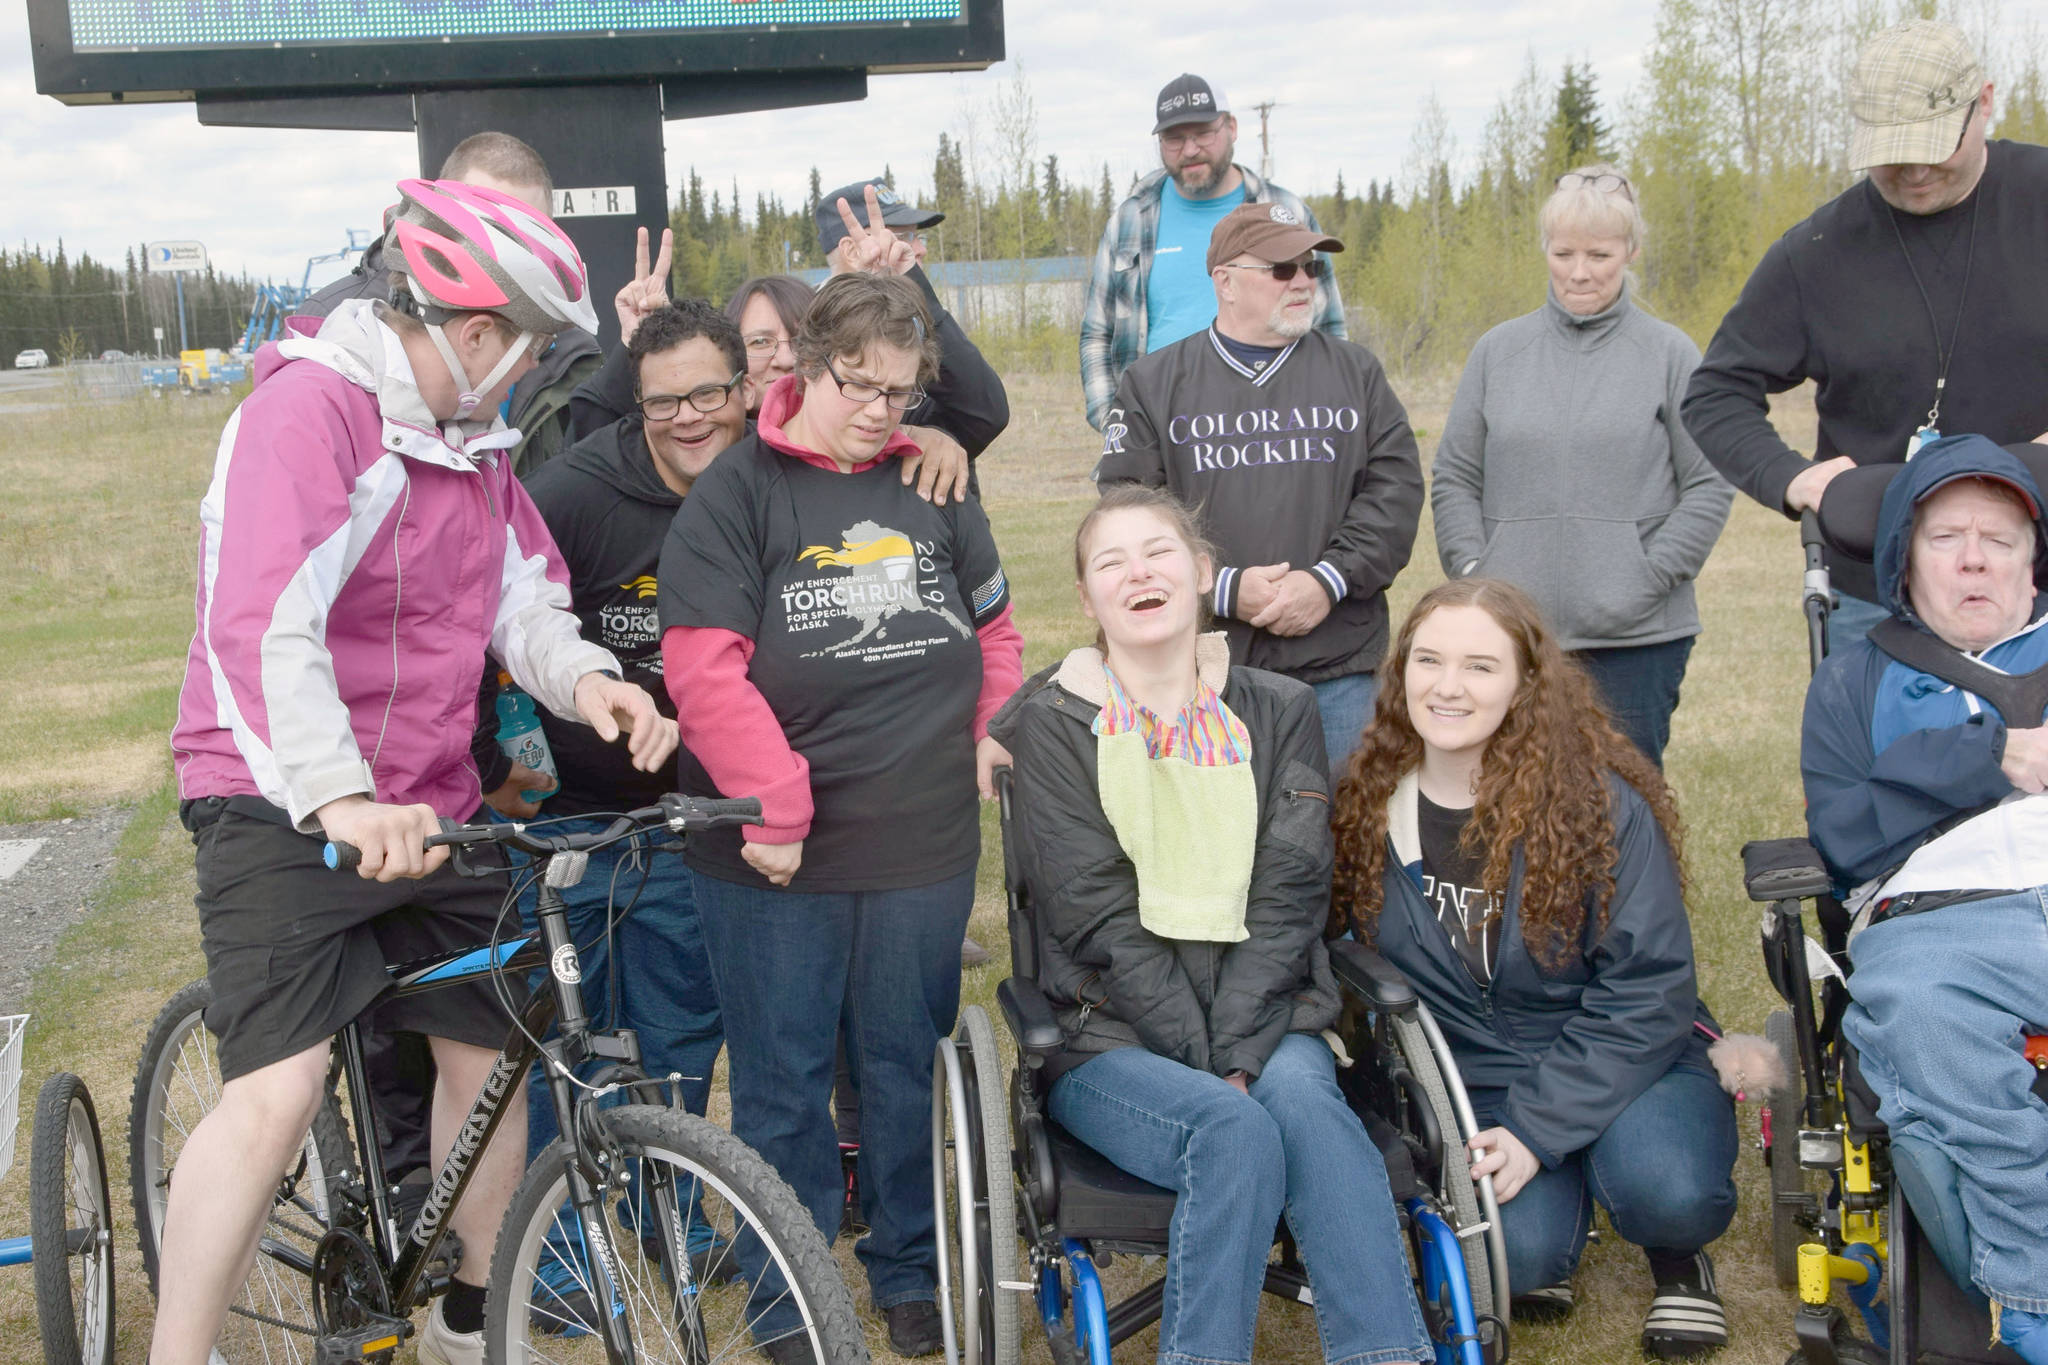 Participants in the annual Special Olympics Torch Run smile for a photo outside the Soldotna Regional Sports Complex in Soldotna Alaska on May 18, 2019. (Photo by Brian Mazurek/Peninsula Clarion)